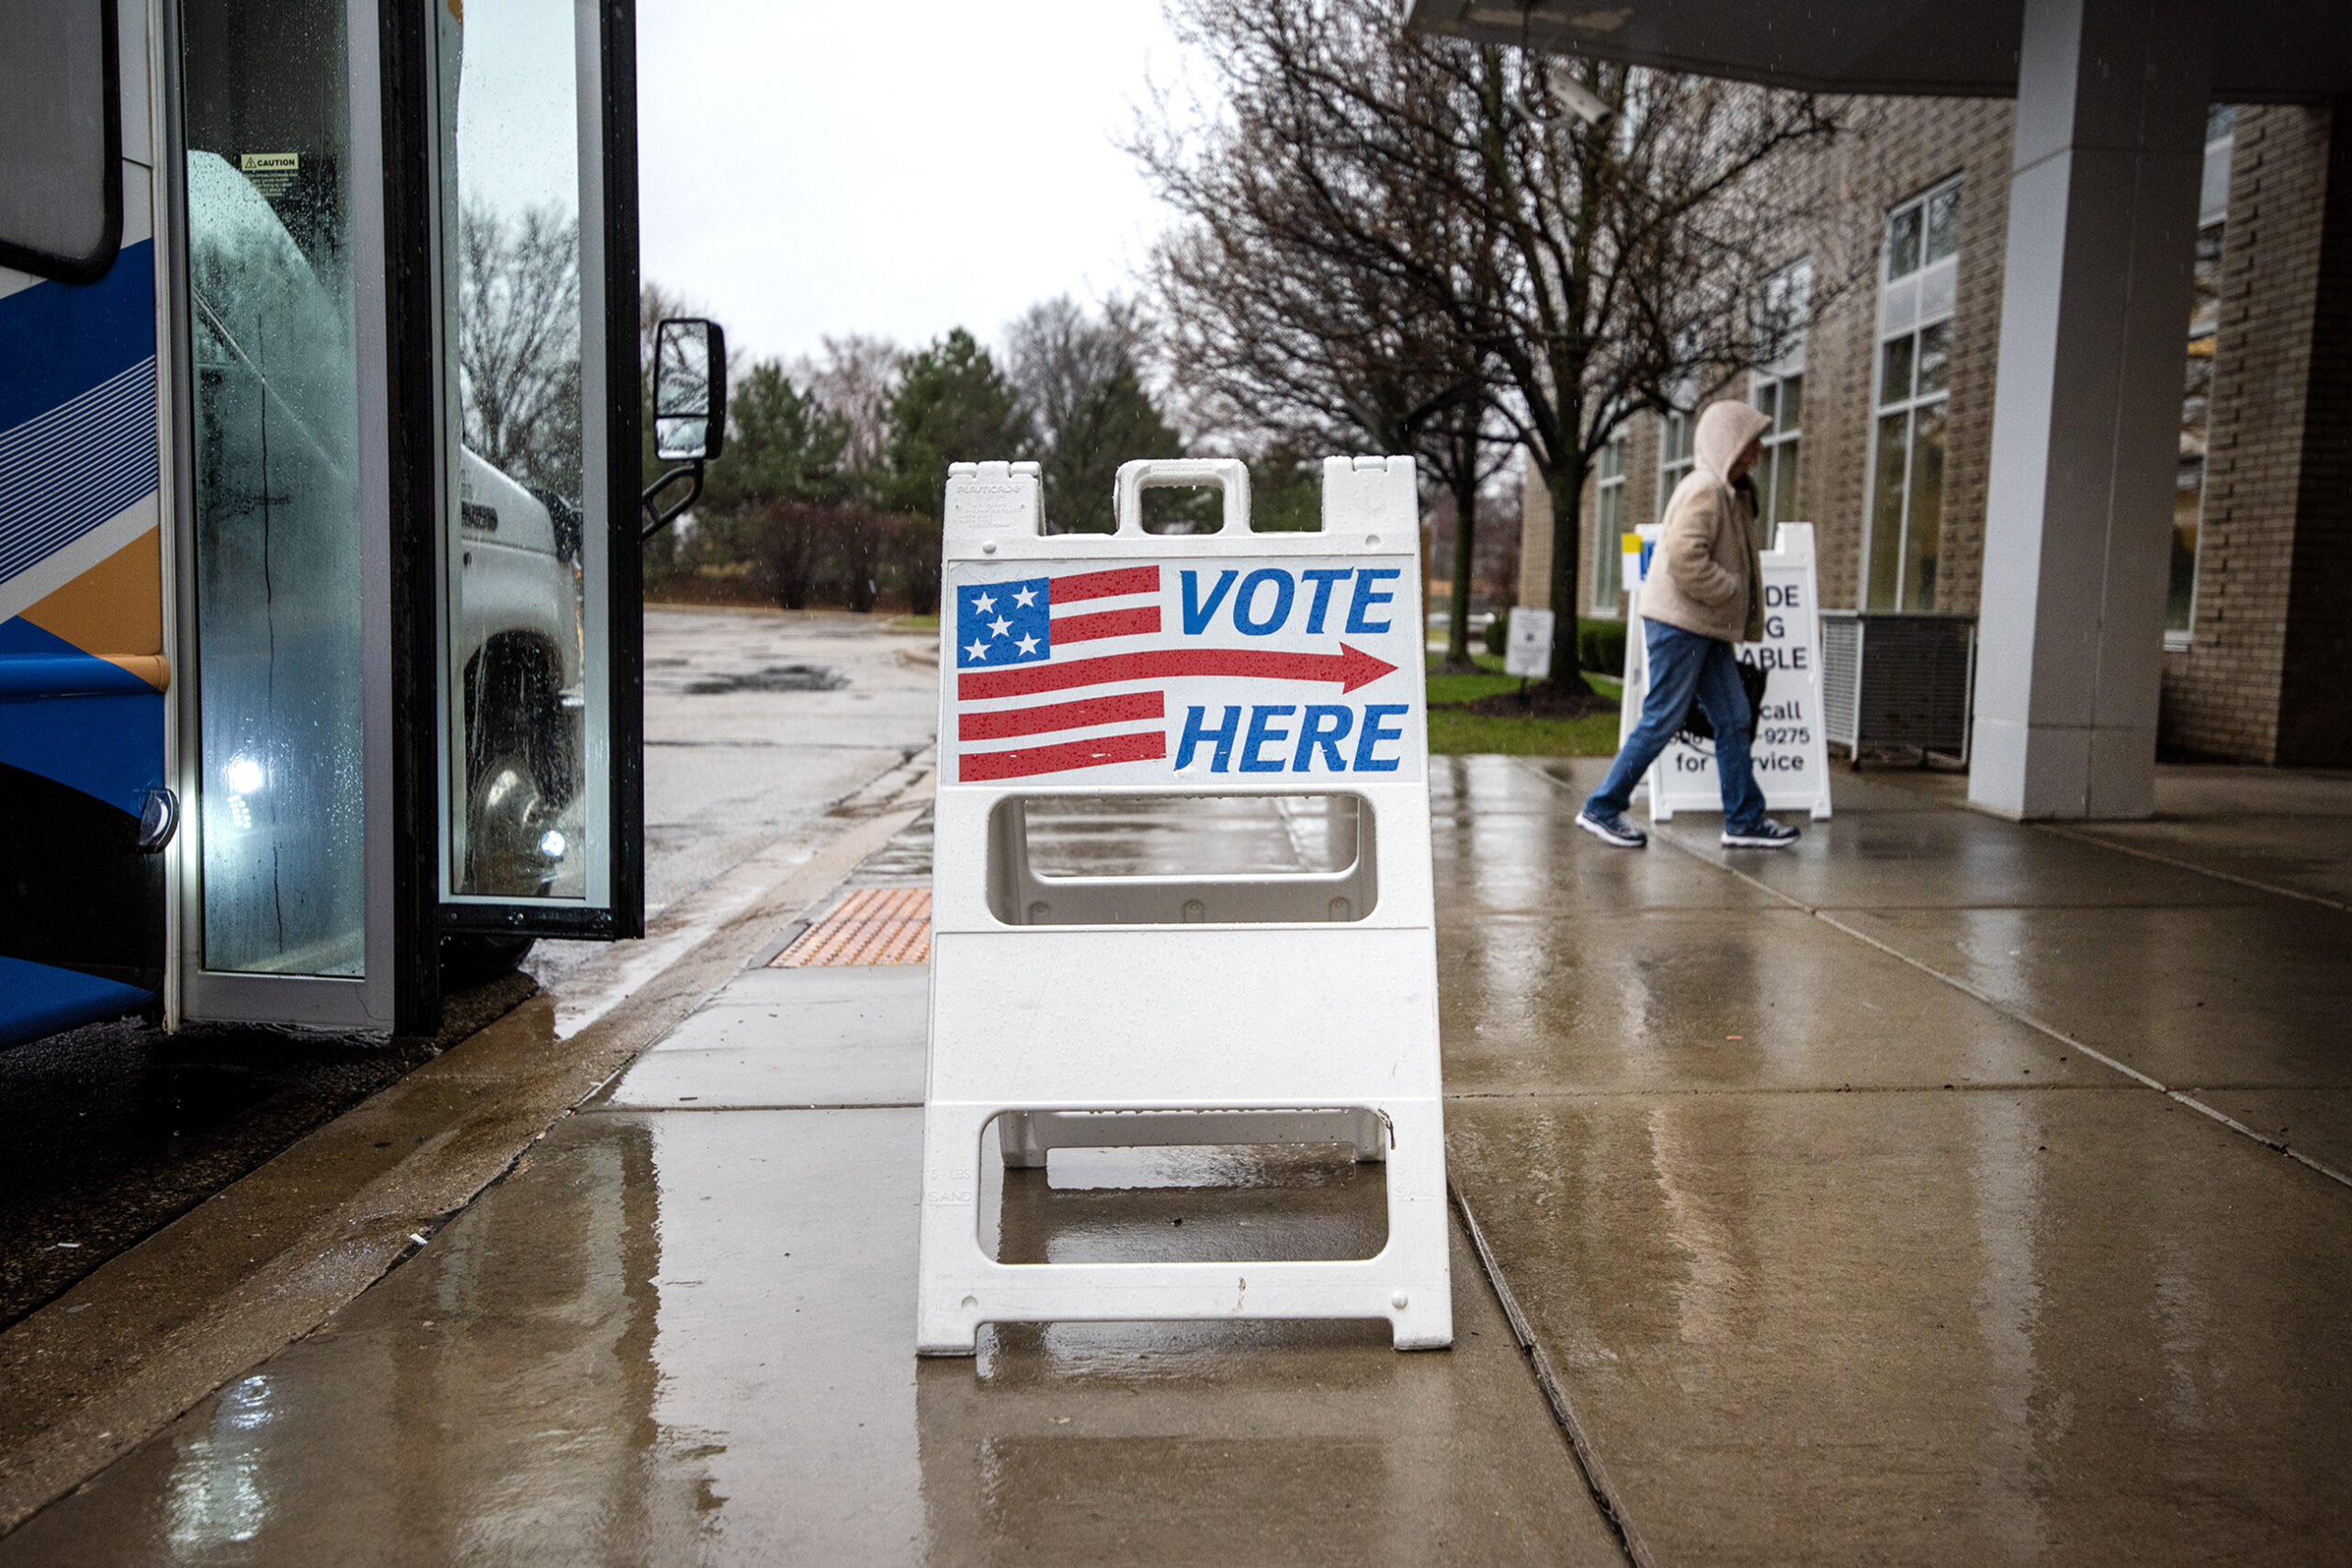 A sign with a US flag that says "vote here" with an arrow is displayed outside on a sidewalk. A parked bus and a pedestrian are nearby.